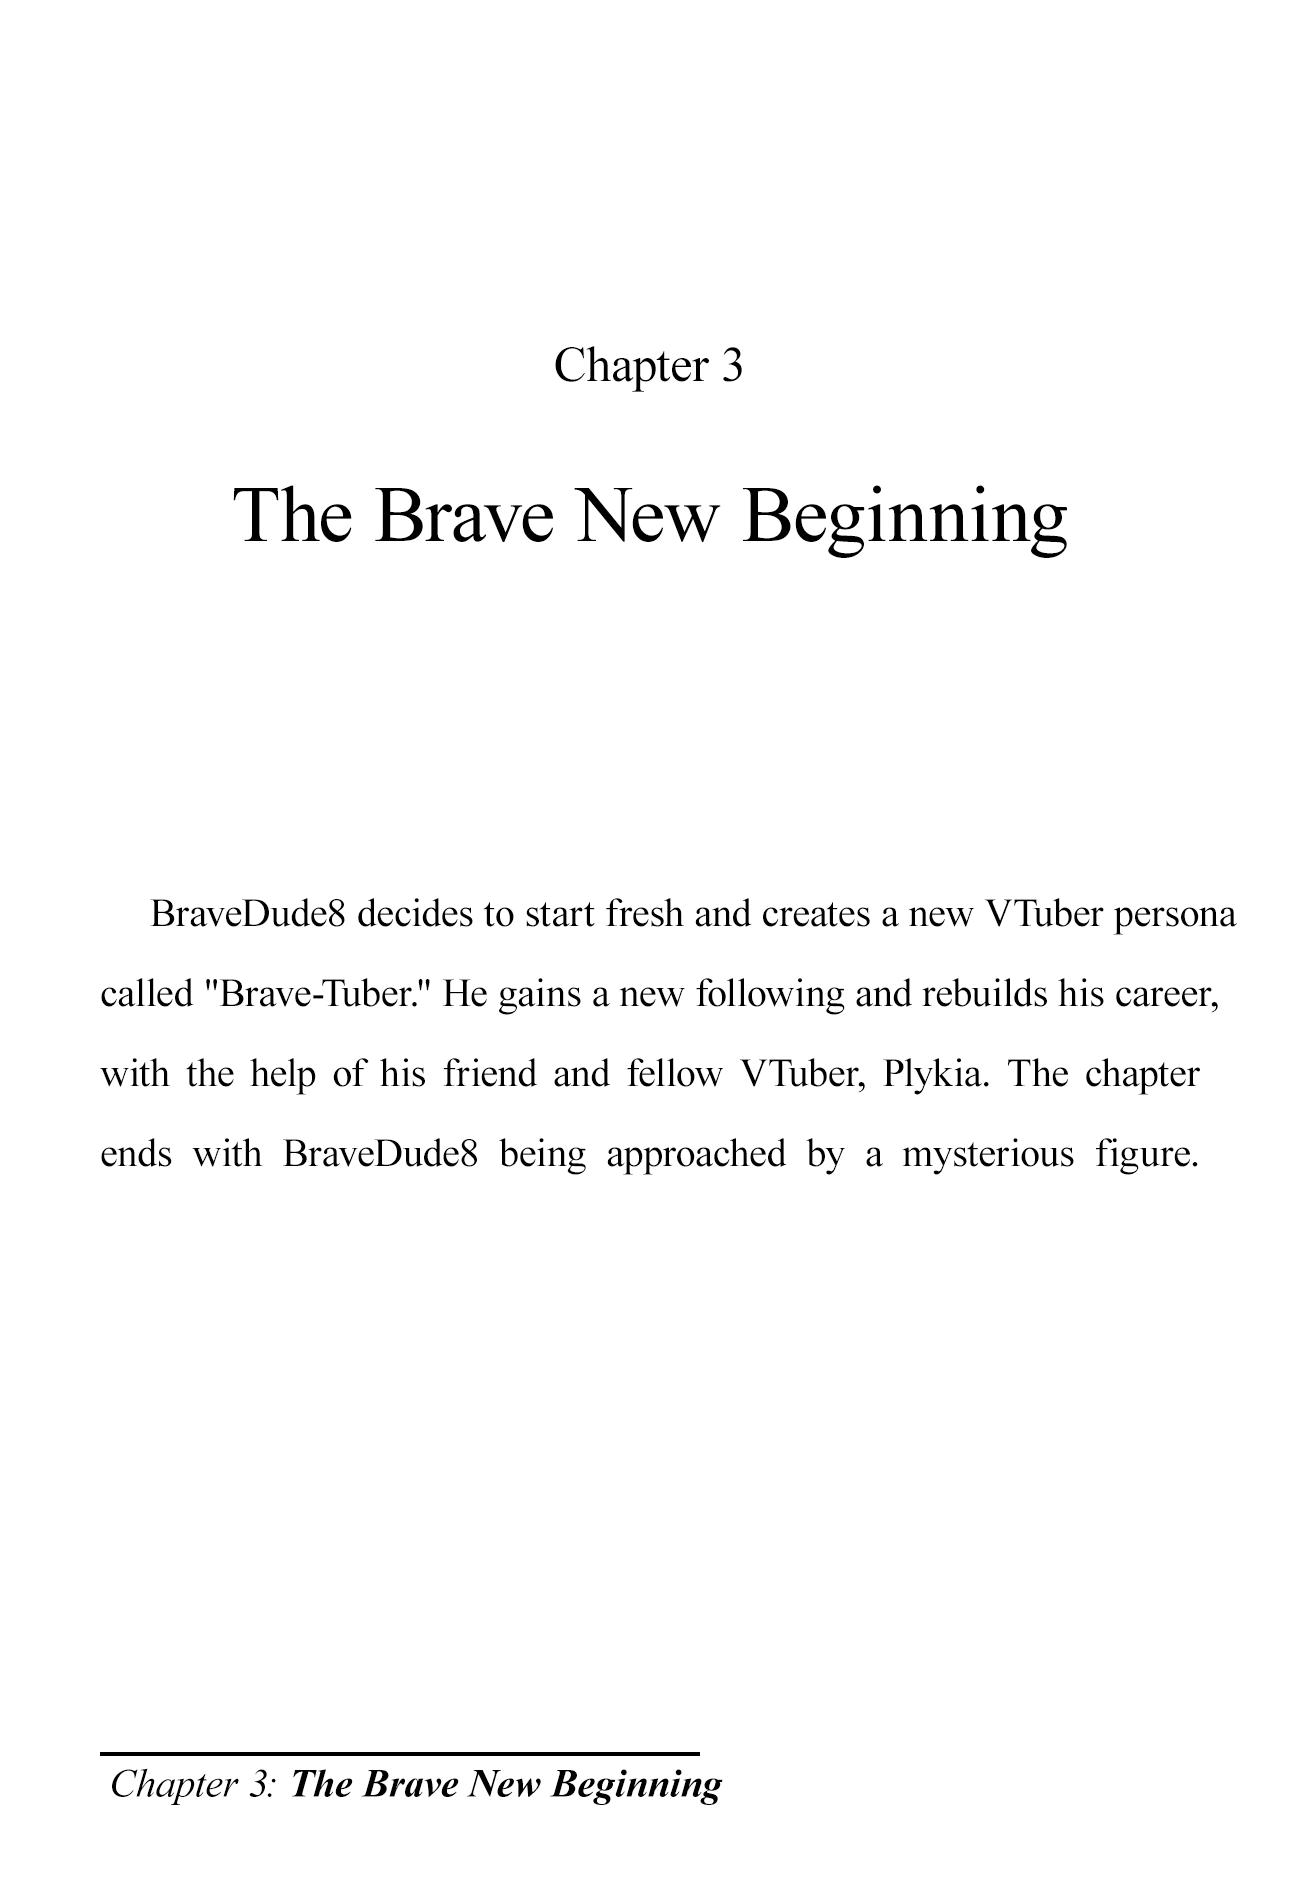 The Brave-Tuber - Page 1